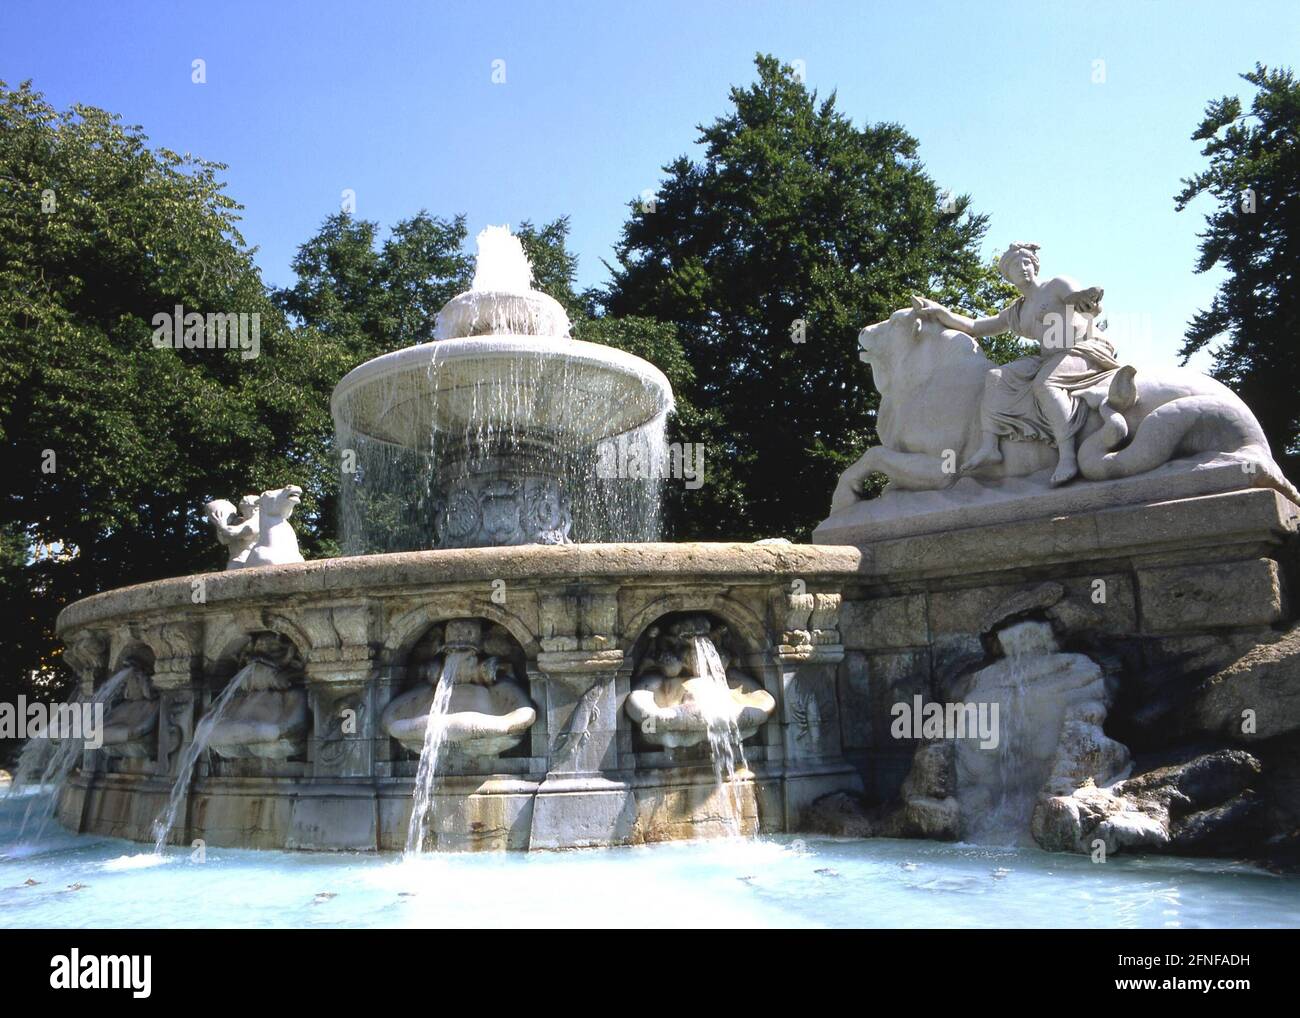 Date of photograph: 12.07.1994 The Wittelsbach Fountain on Lenbachplatz is considered one of the most beautiful fountains in the city. It was built in 1895 by Adolf von Hildebrand. [automated translation] Stock Photo